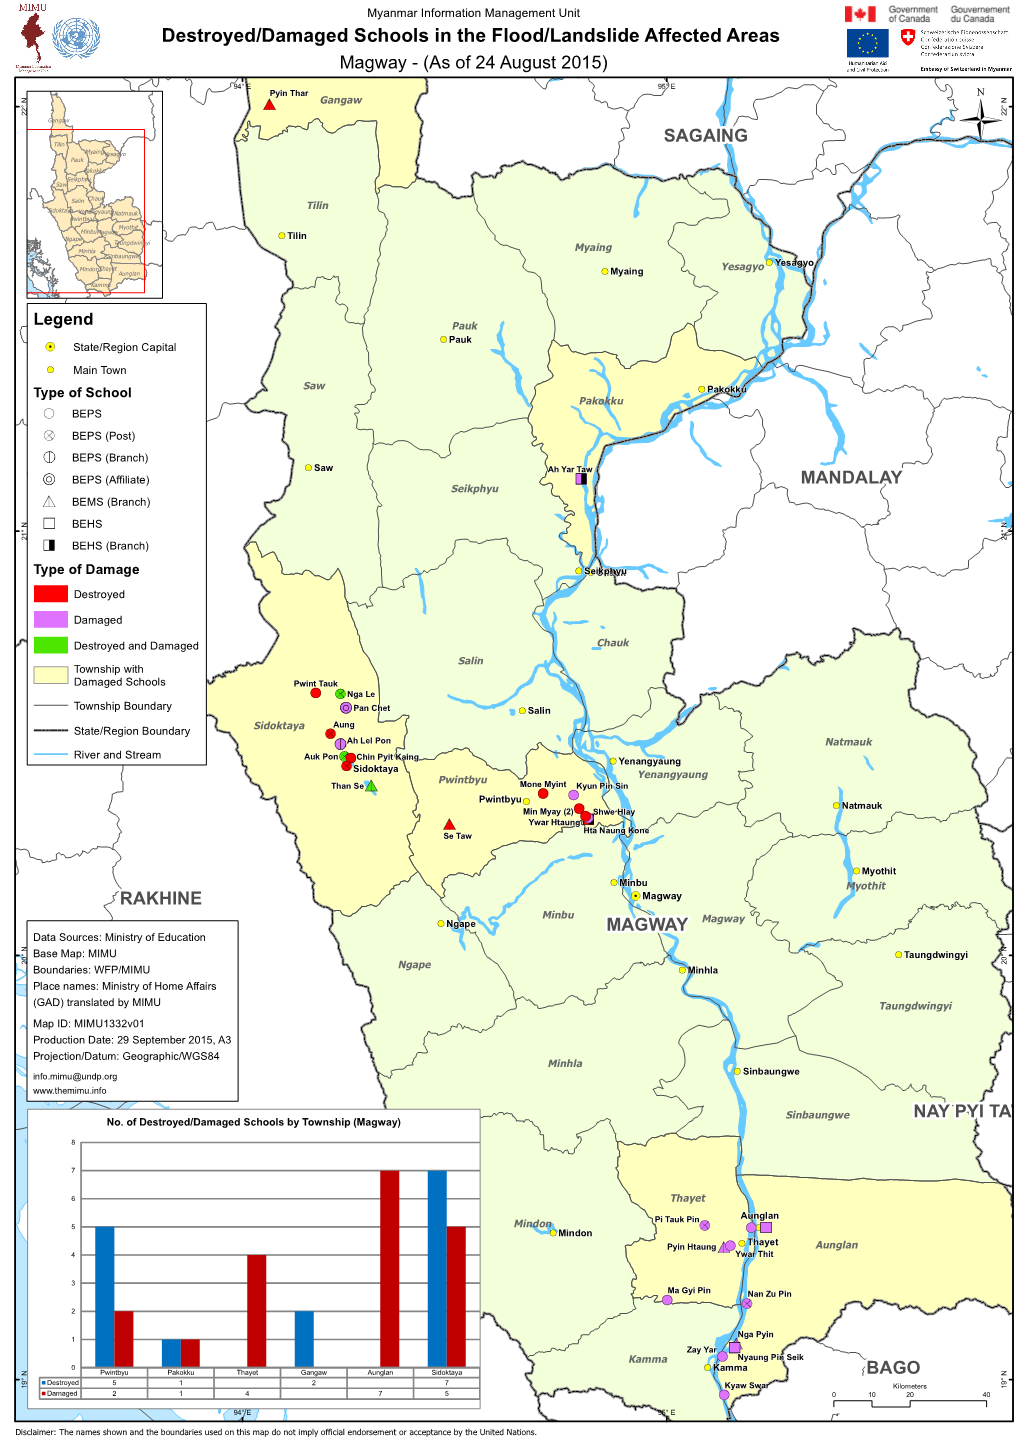 Destroyed/Damaged Schools in the Flood/Landslide Affected Areas Magway - (As of 24 August 2015)